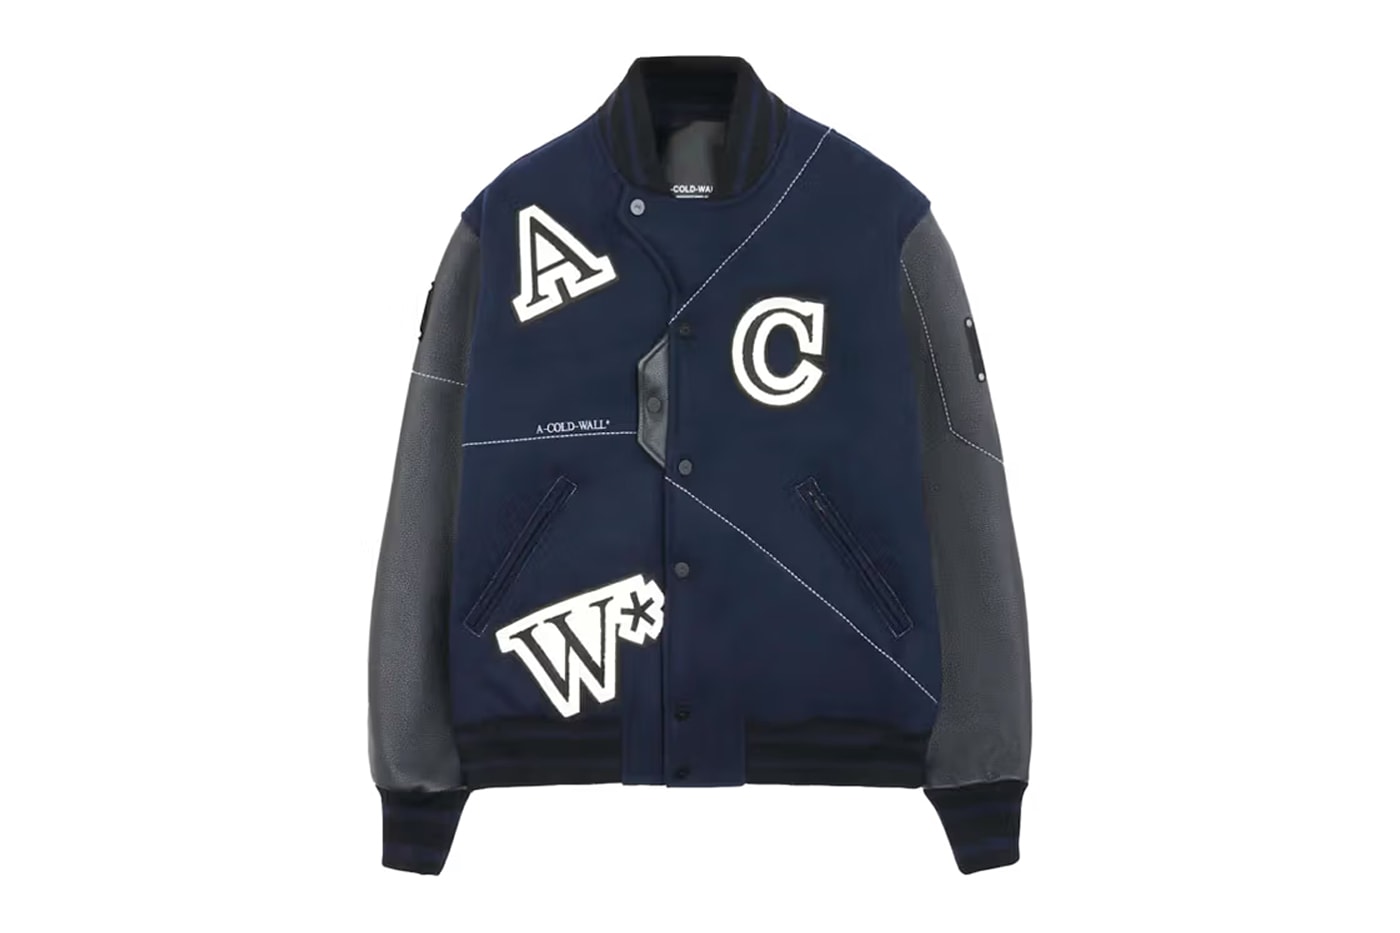 A-COLD-WALL* から秋にぴったりな“パッチワークボンバー”ジャケットが登場 A-COLD-WALL* Patchwork Bomber Americana Sportswear varsity style jacket pre-fall 2023 collection order online price details wool mix